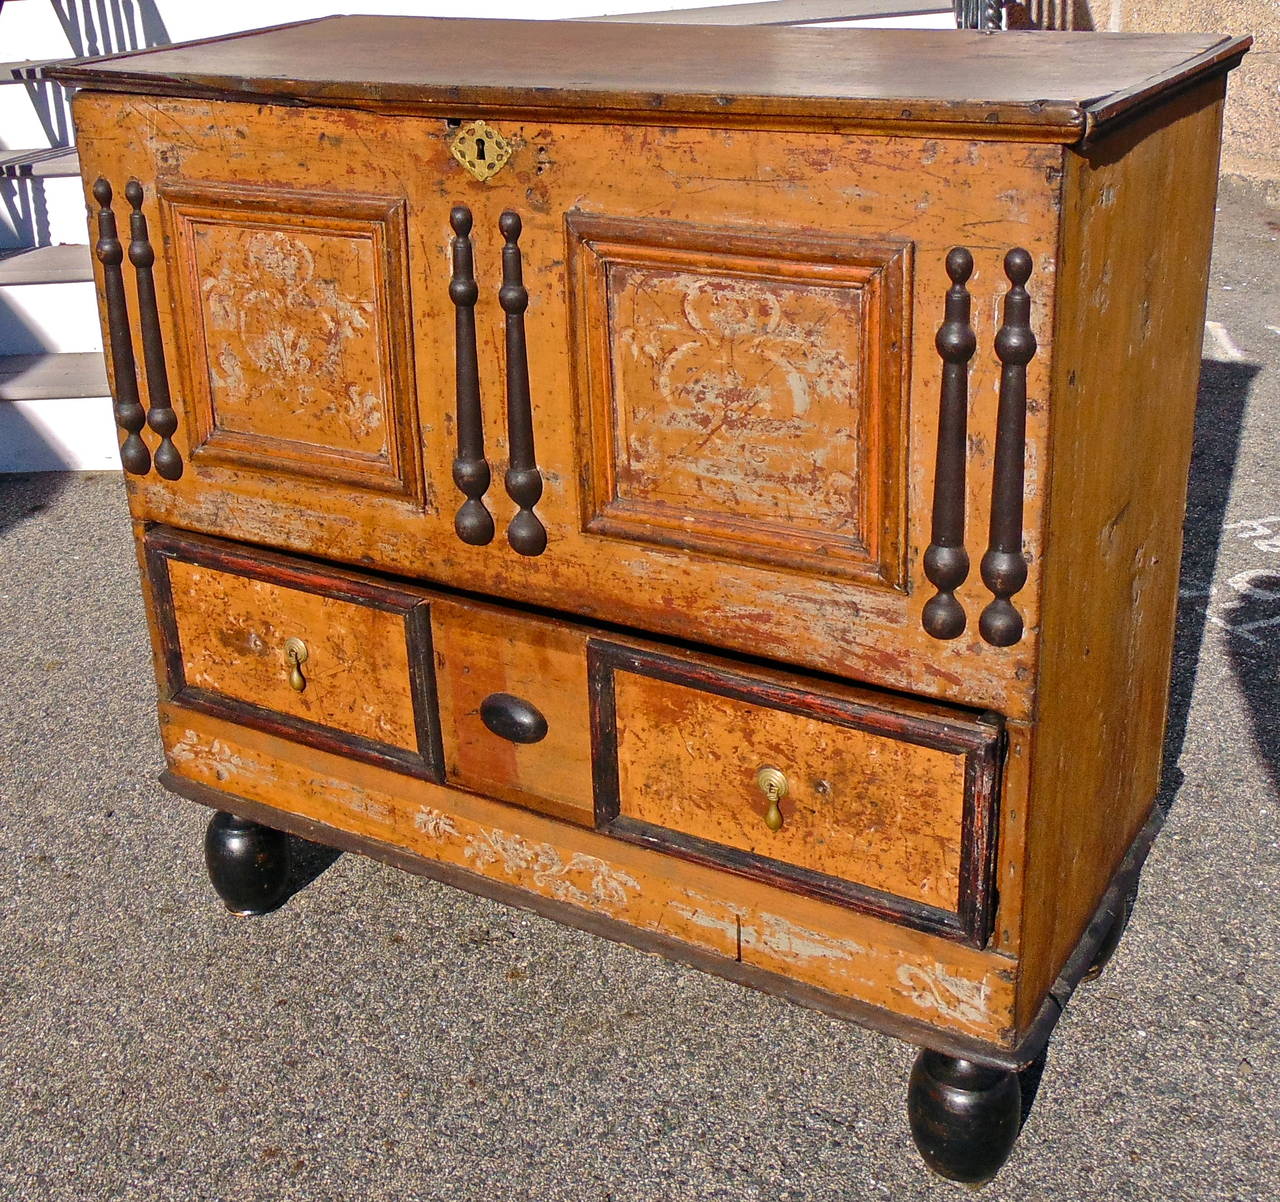 Period 17th century American painted blanket chest.

--Known as 